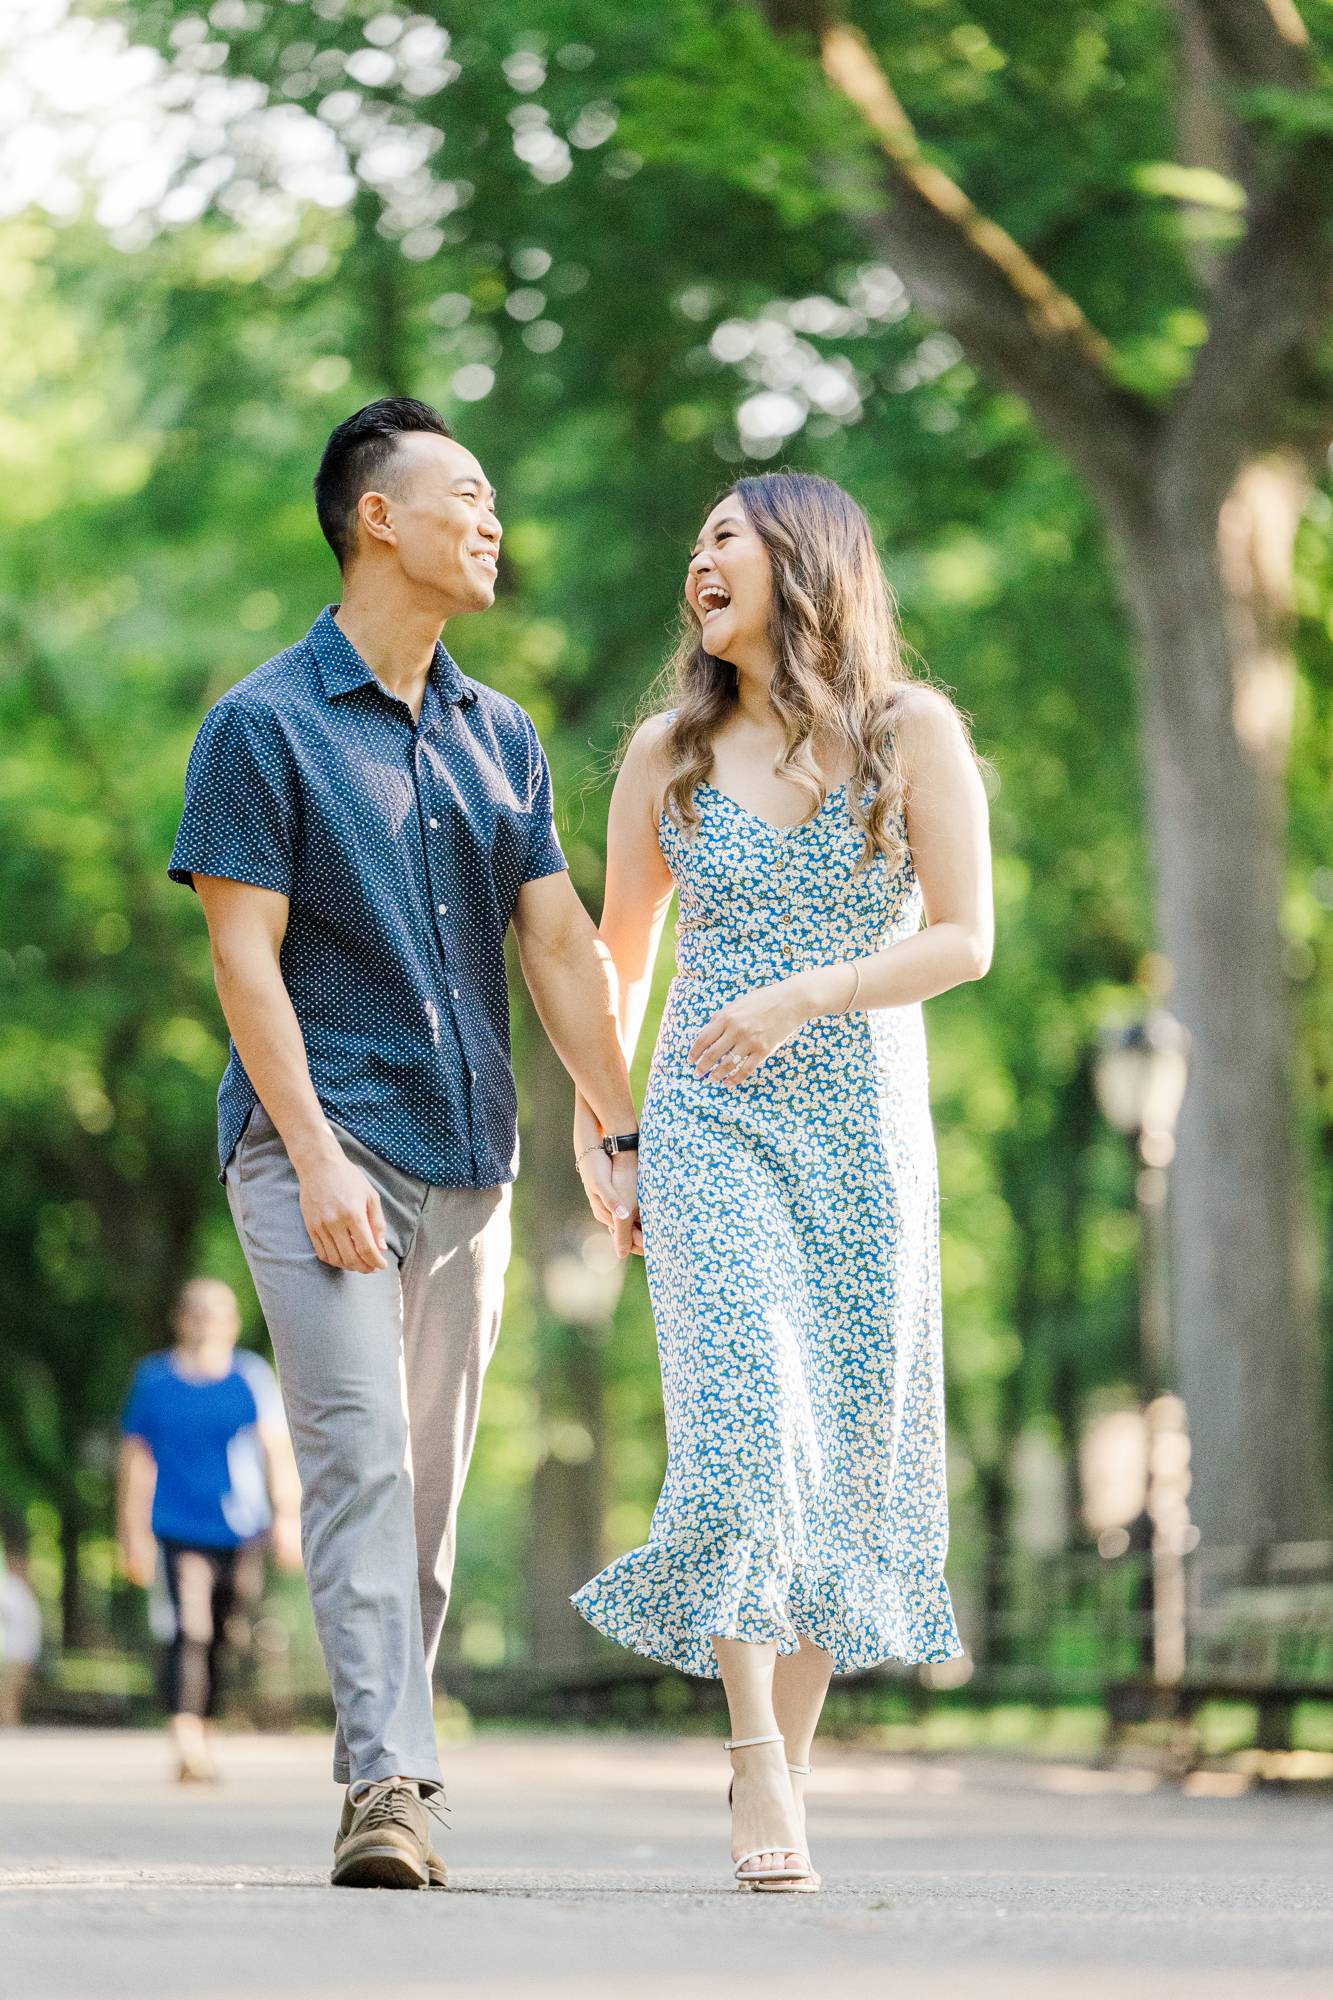 Cute Engagement Photos in Central Park, New York